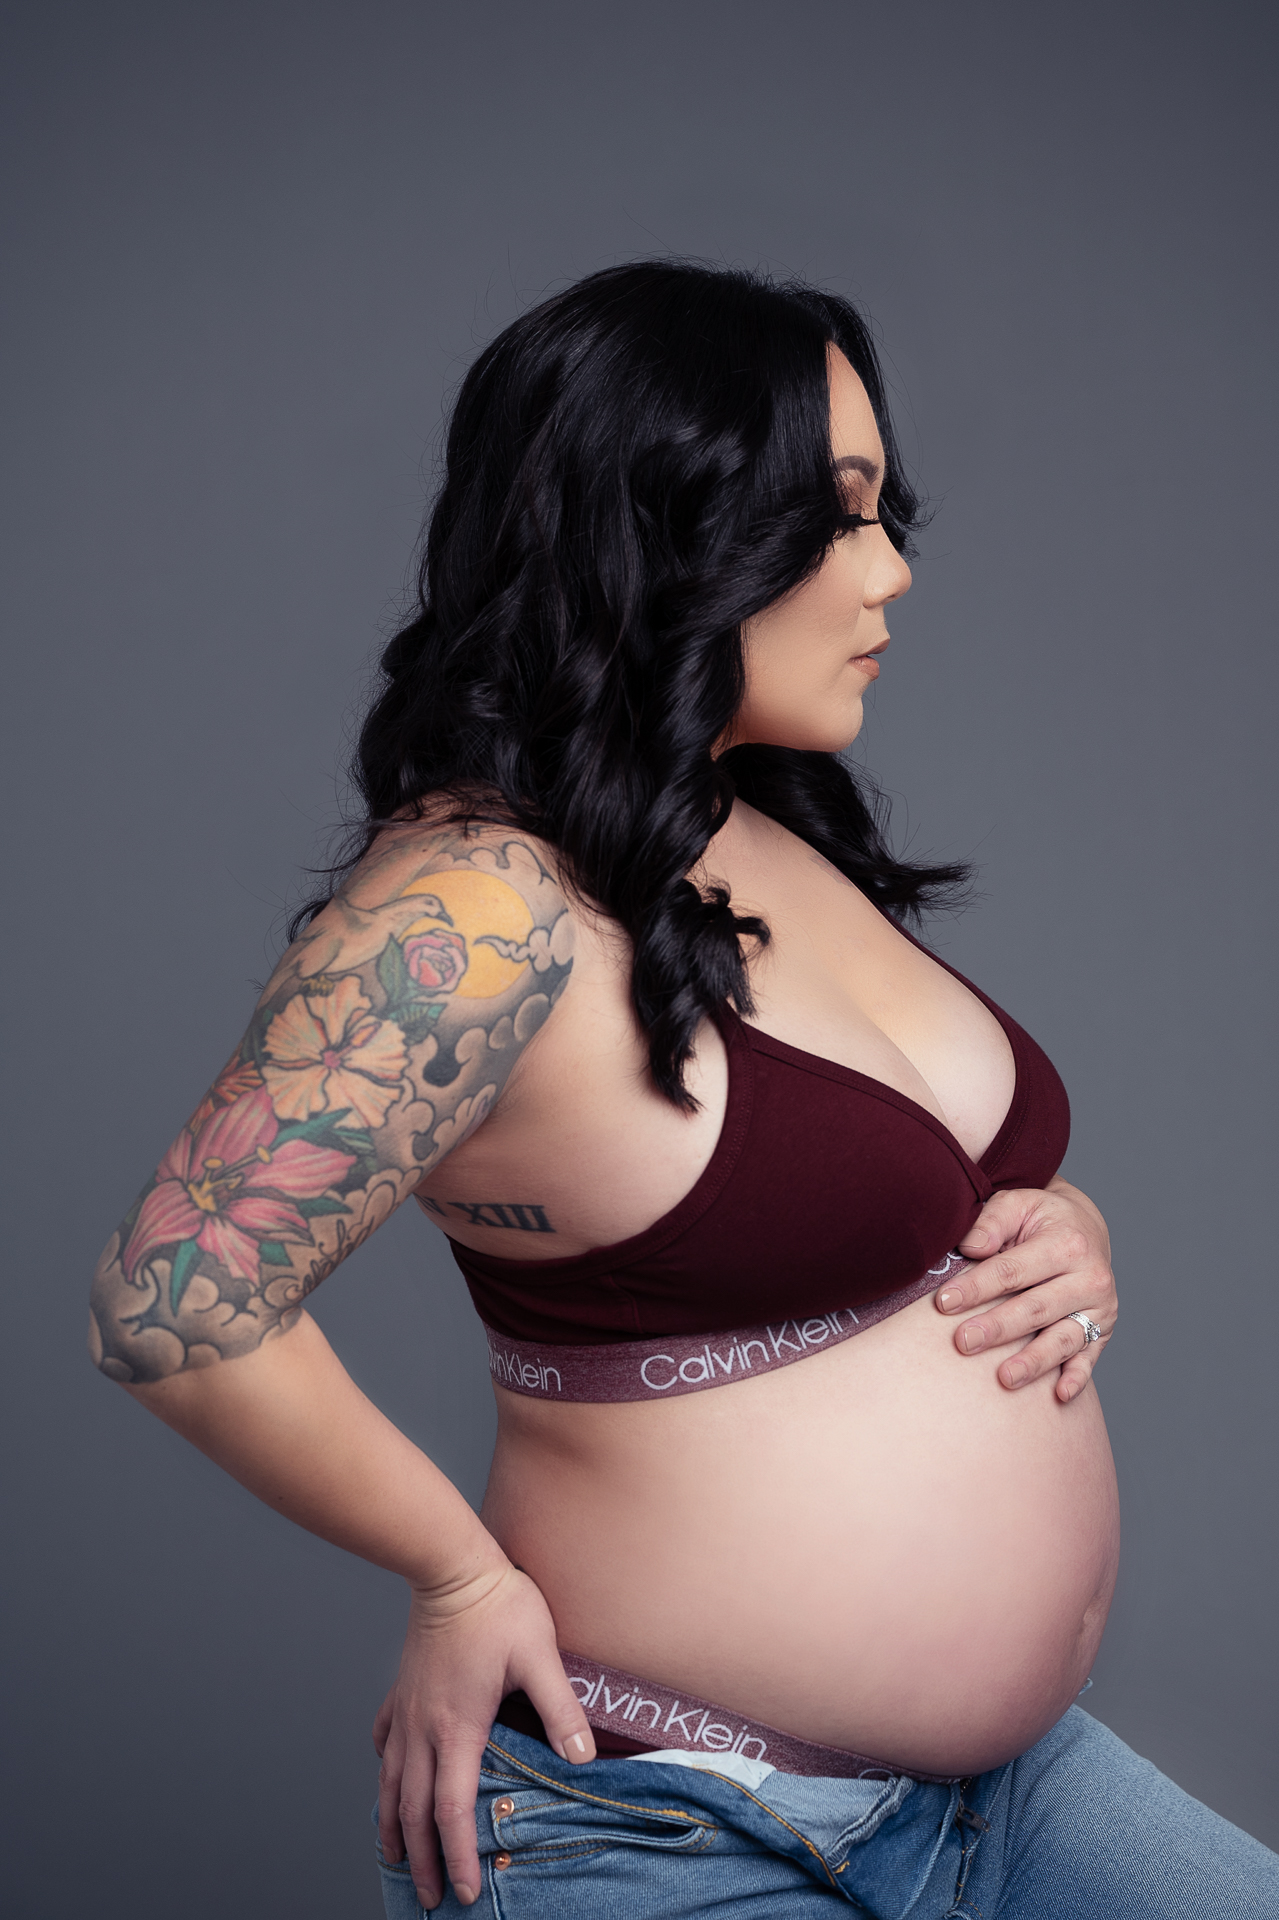 pregnant woman poses for Gaby Clark photo studio with tattoo on her right arm wearing Calvin Klein underwear and blue jeans